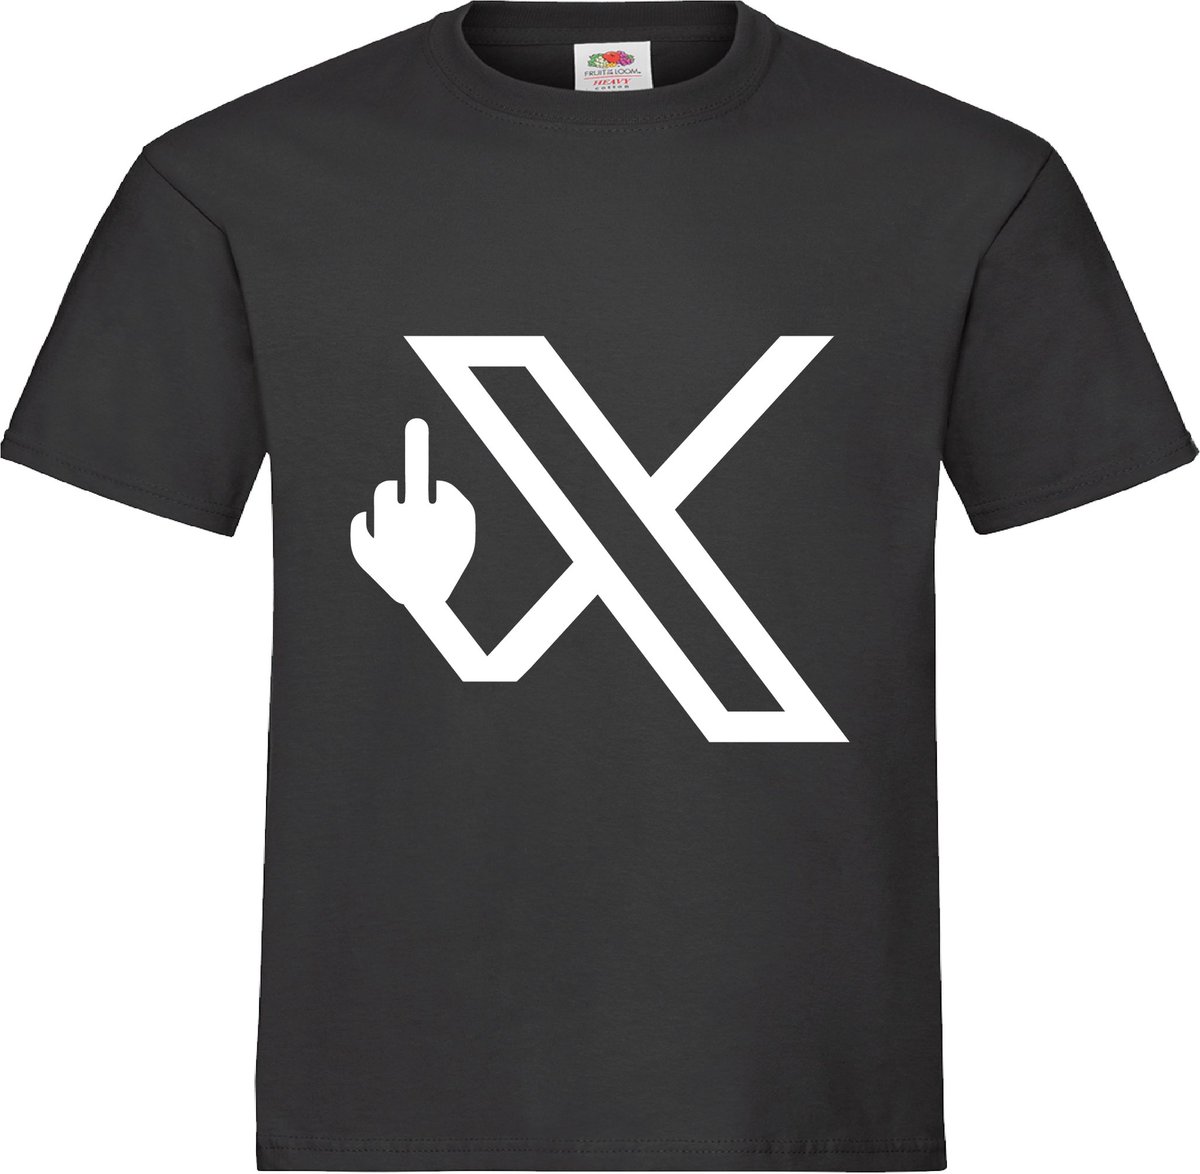 You miss #larry und you don't like #twitterX #X?
Here is the #shirtoftheday for you. #ShirtdesTages 

pogobaer.de/fuuuuX.html